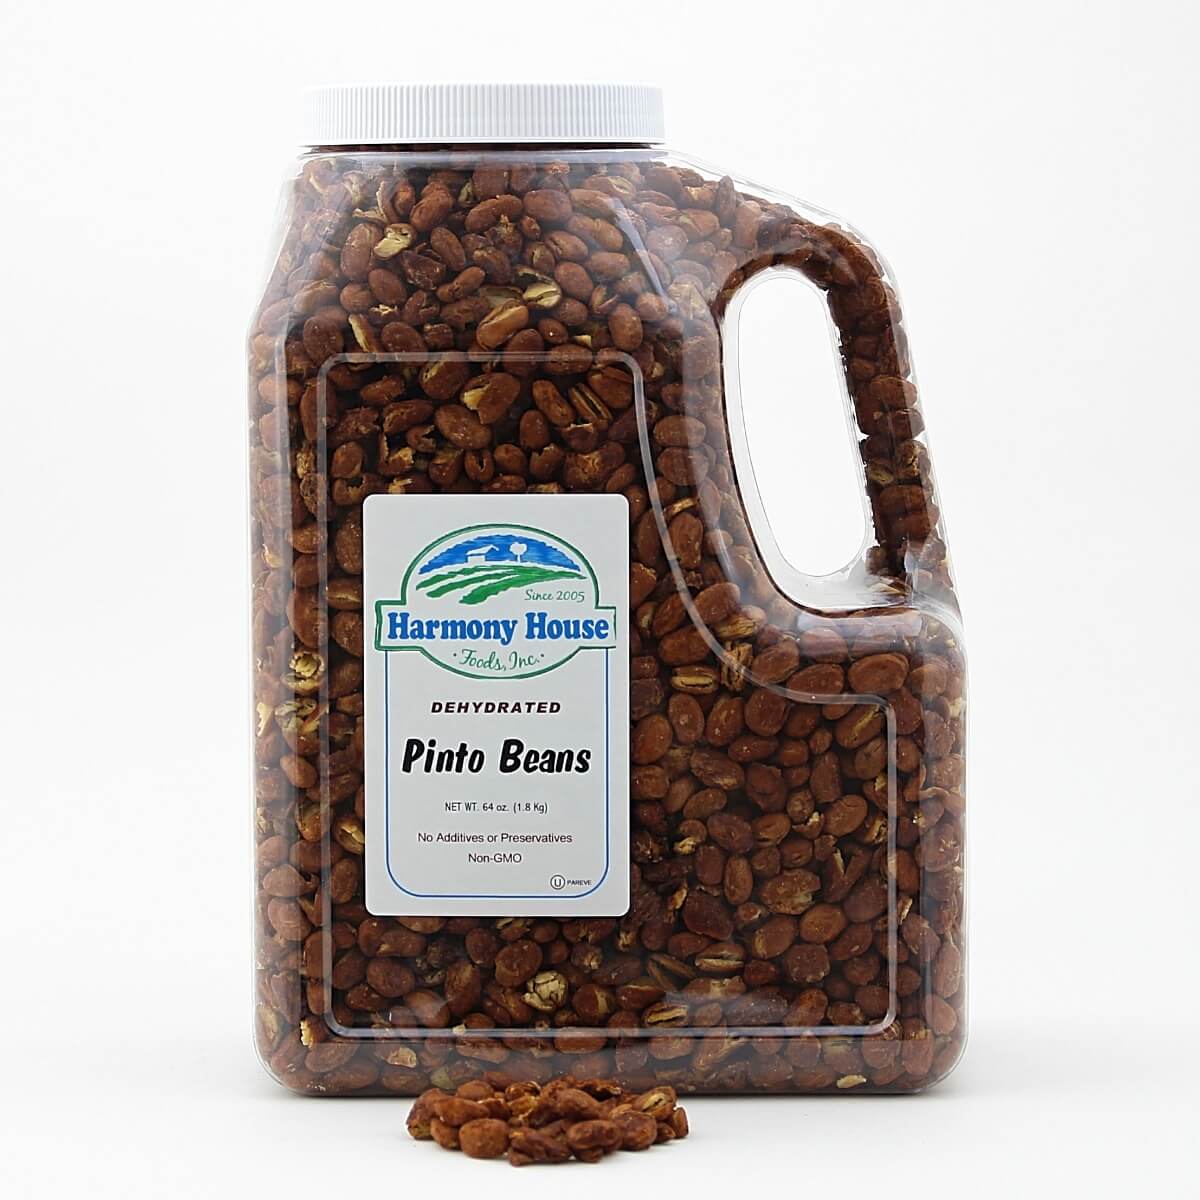 A jug of peanuts on a white background, Harmony House Pinto Beans (4 lbs).